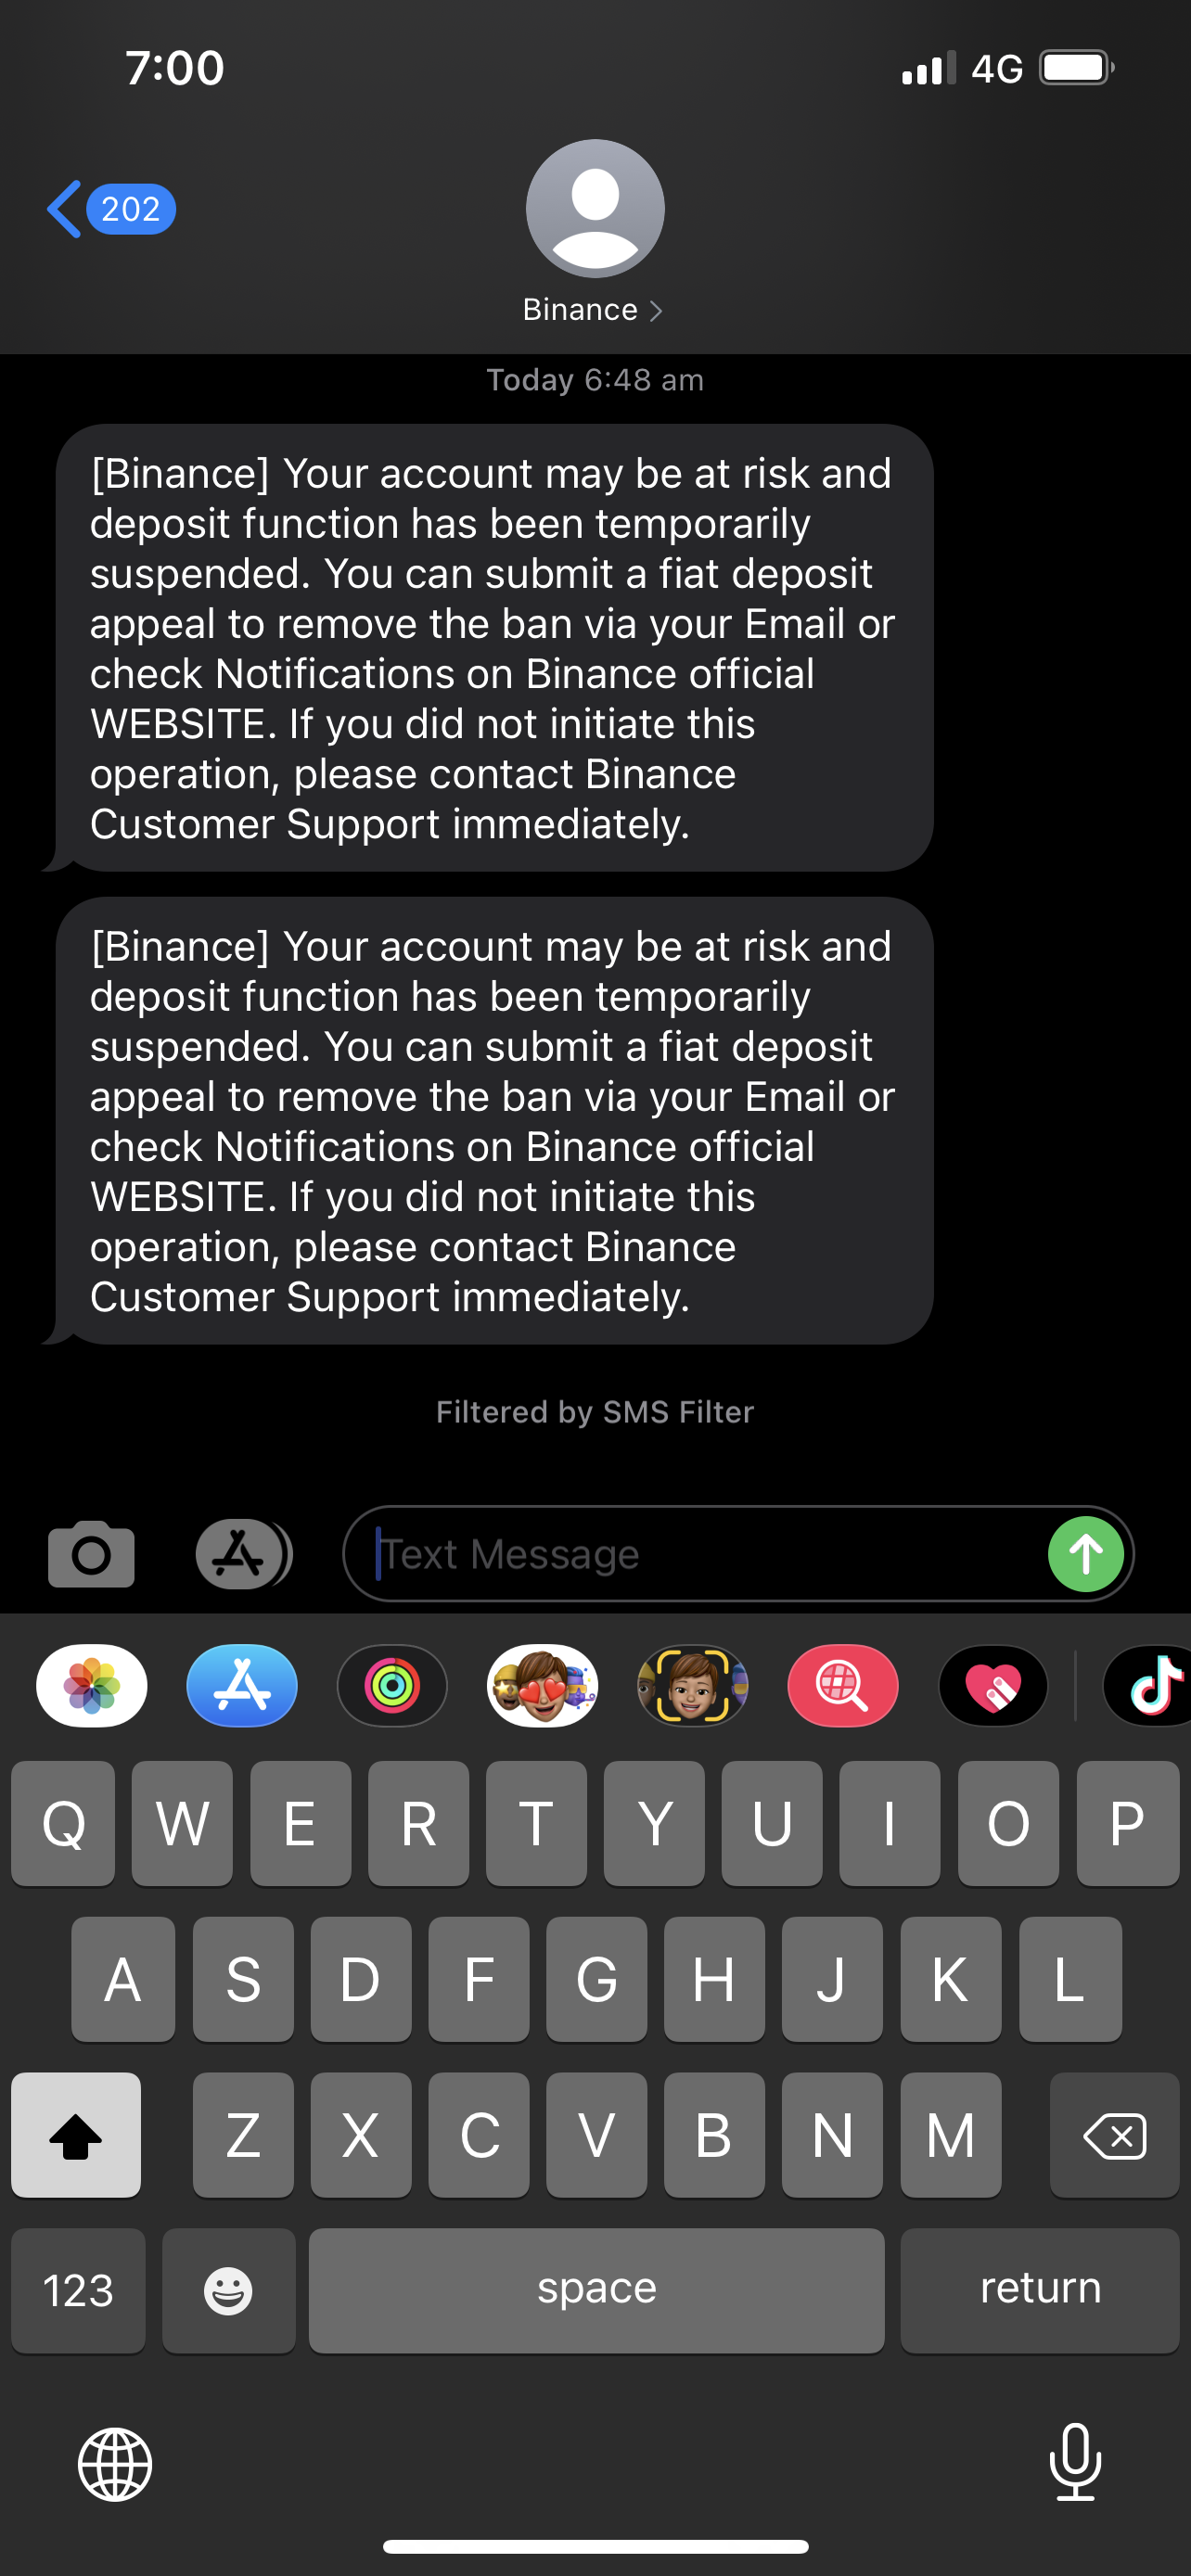 Binance complaint Deposit function has temporarily been suspended